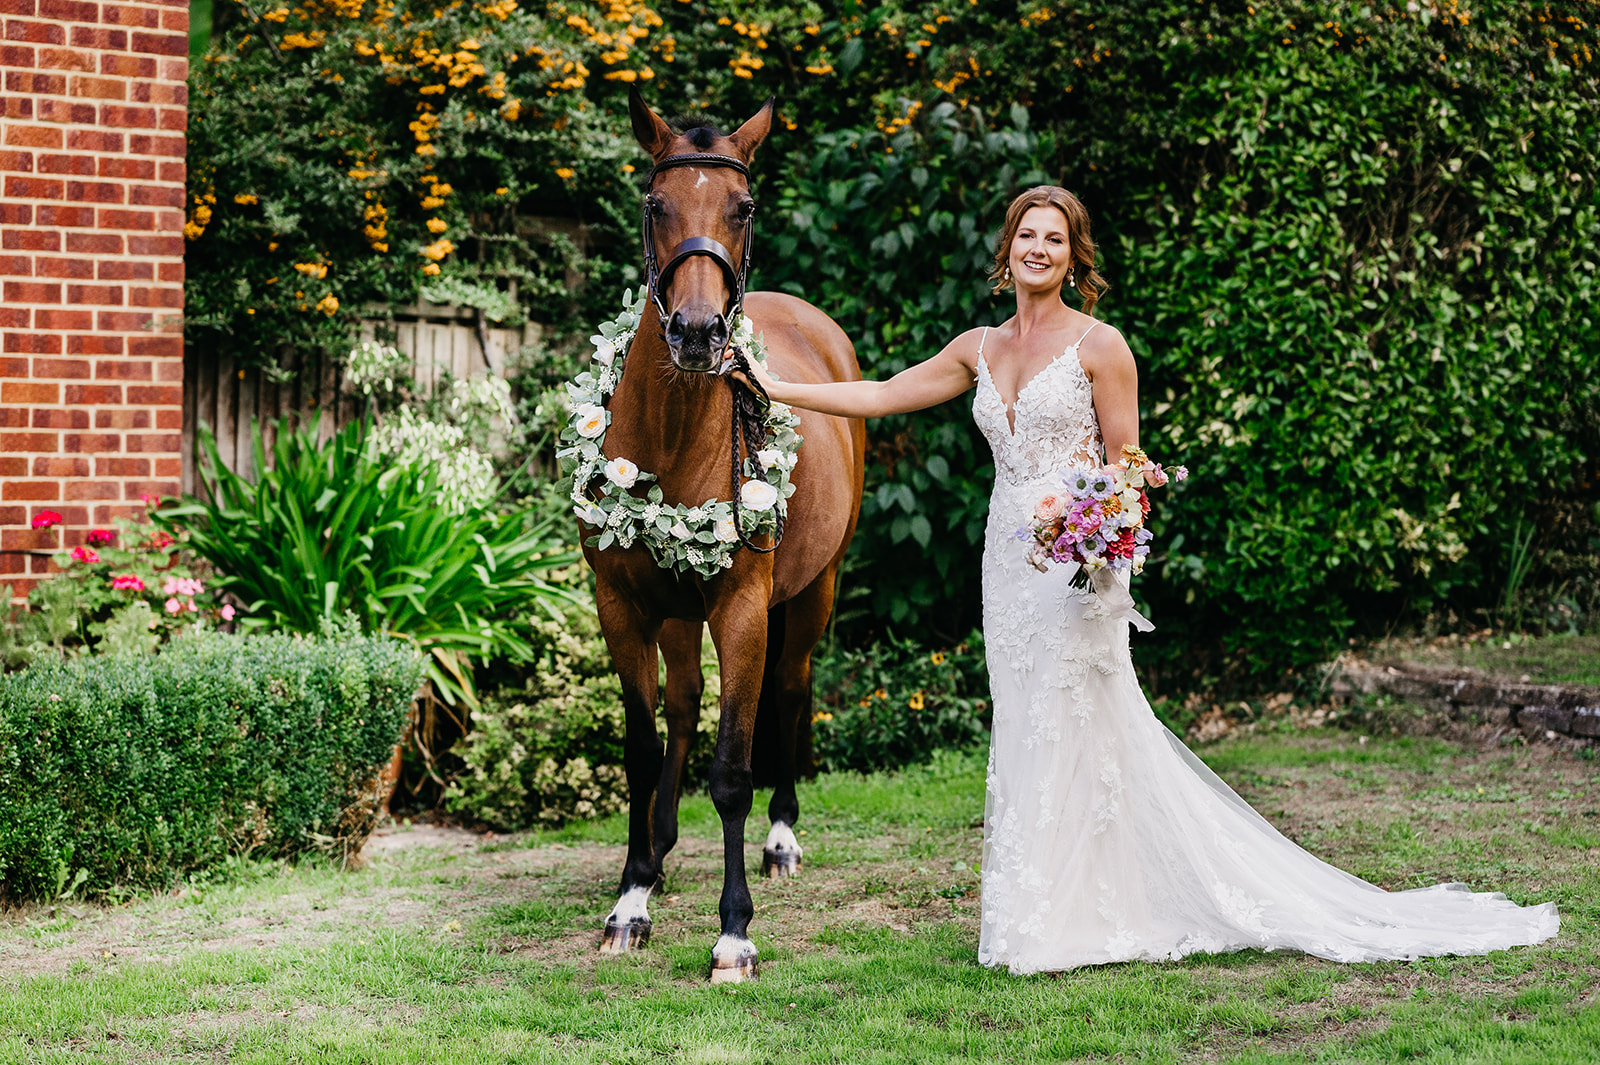 Ella and her horse before the bride departs for the church